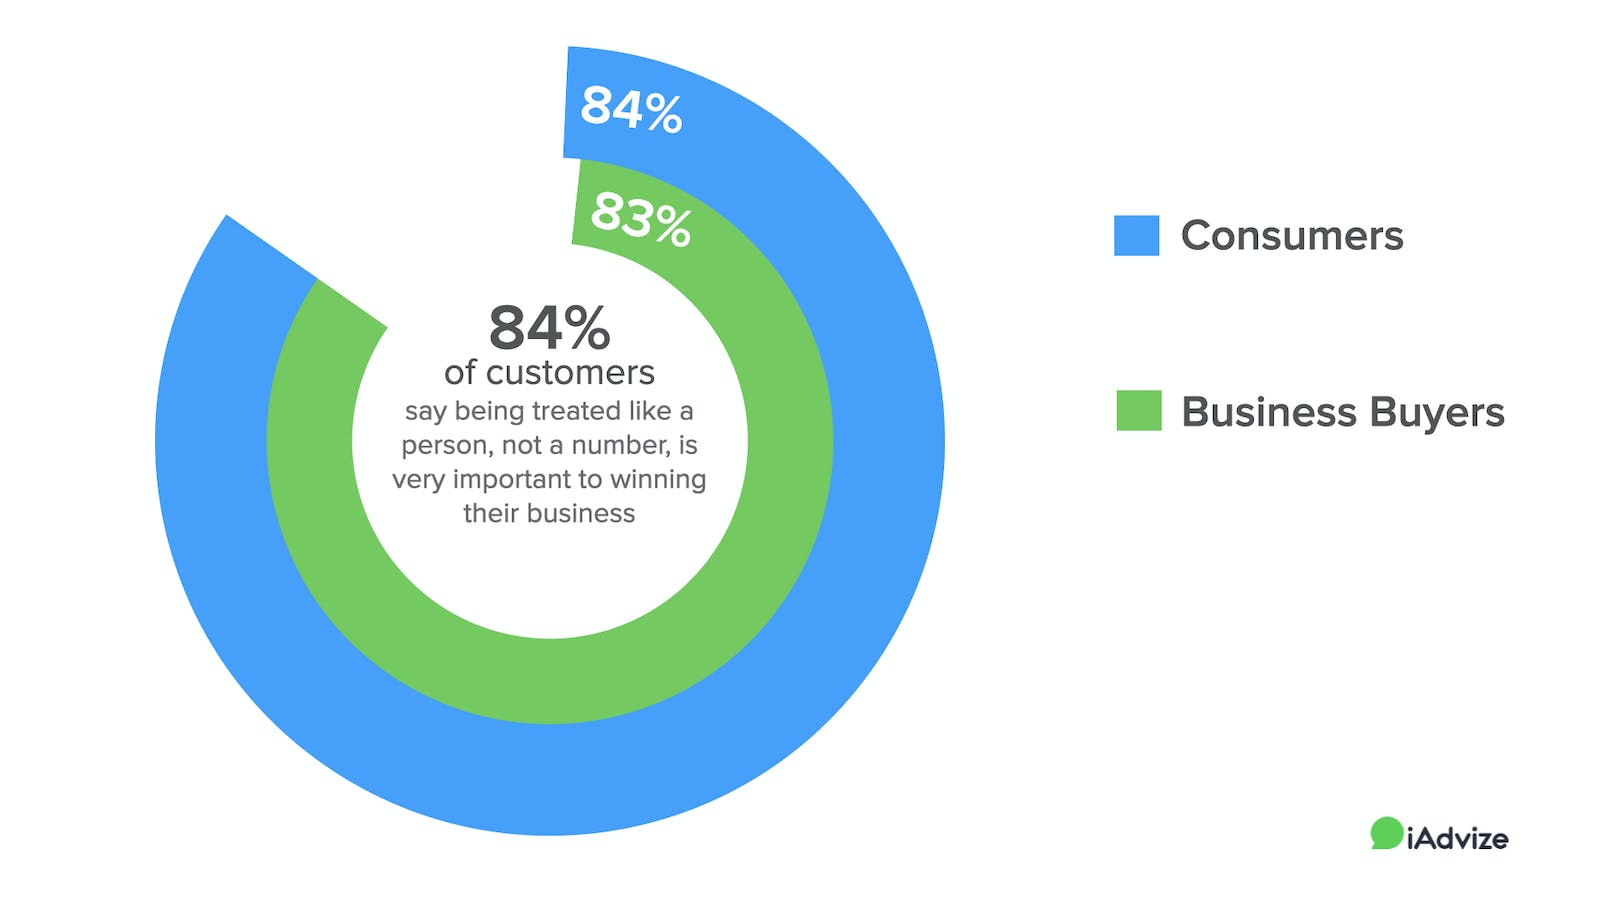 Eighty-four percent (84%) of customers want you to treat them like a person